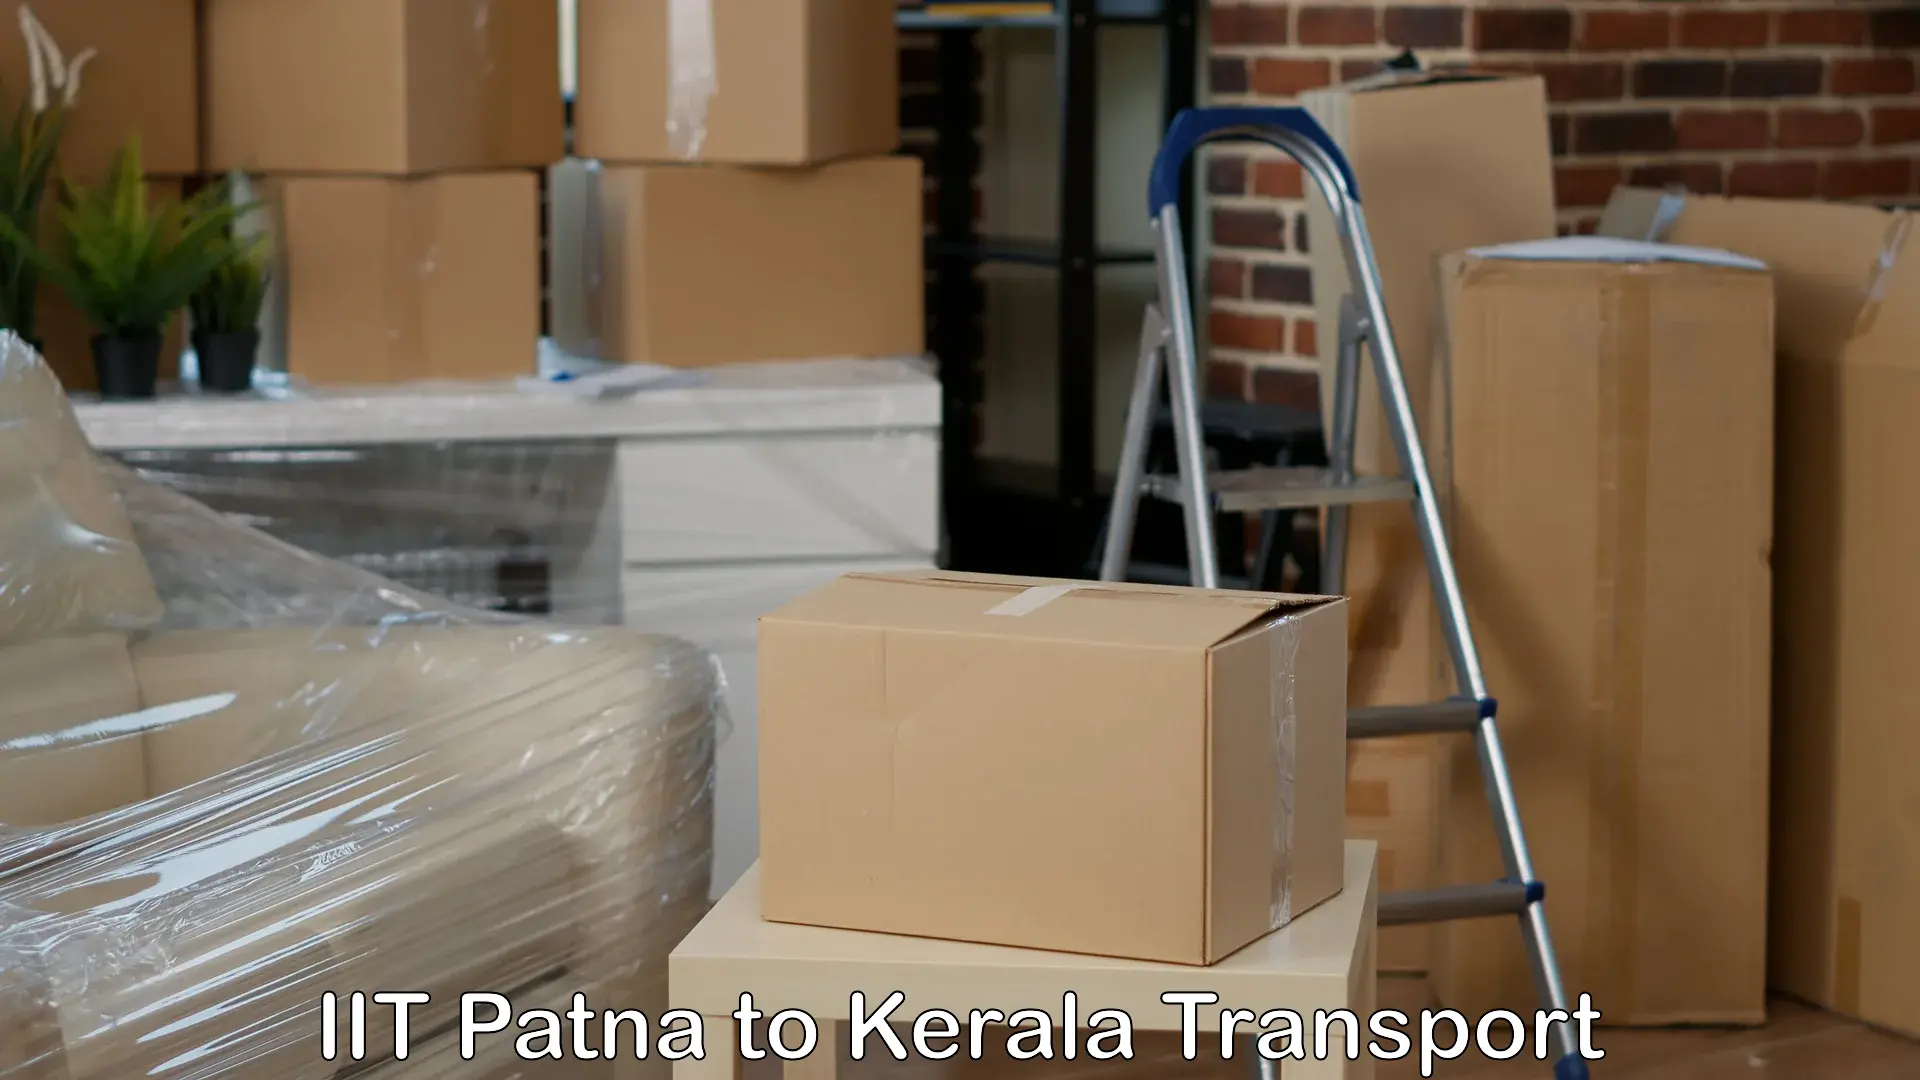 Goods delivery service IIT Patna to Cochin